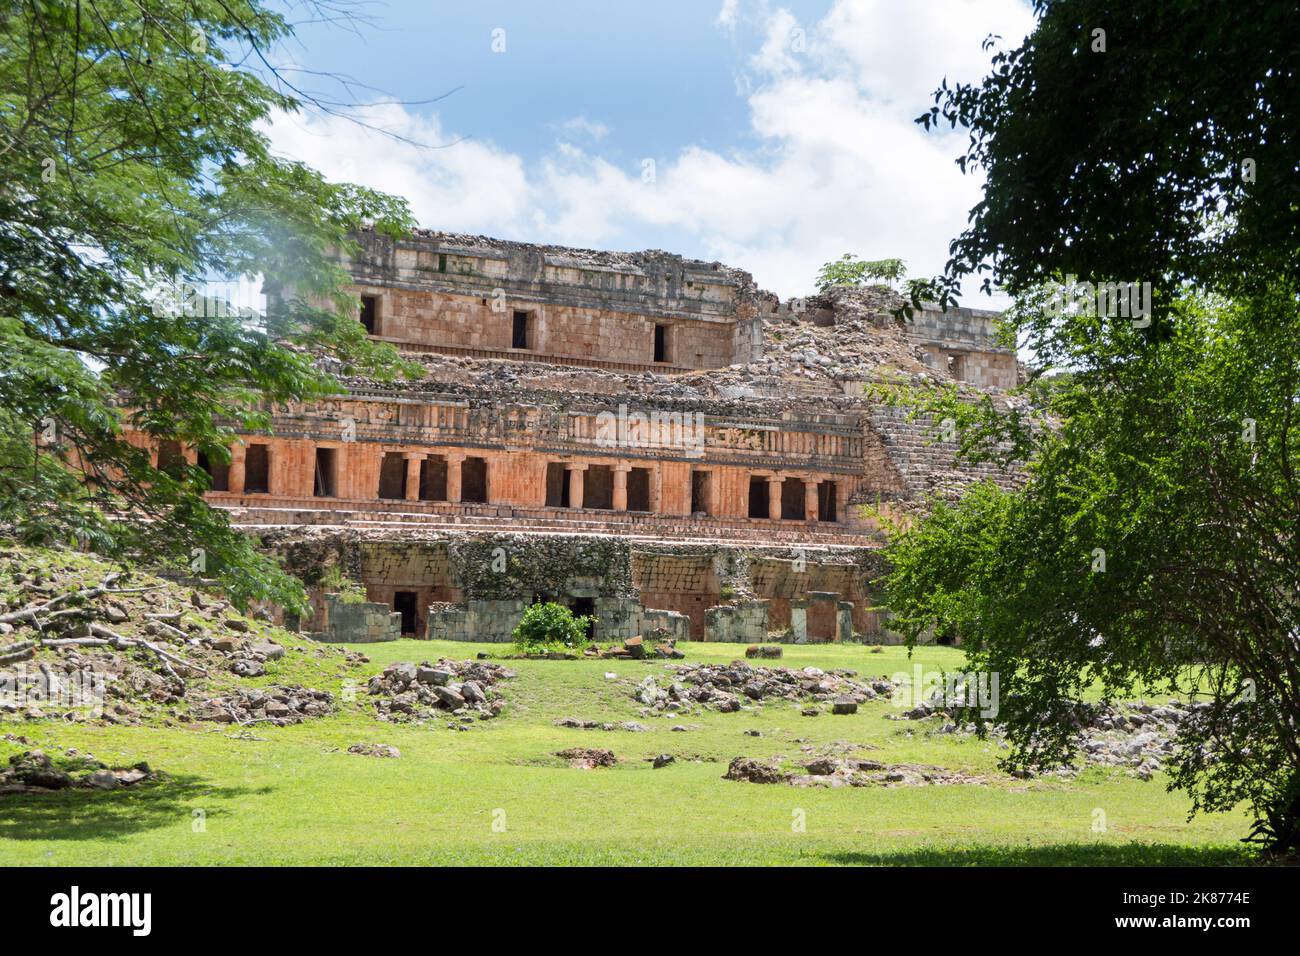 Remains of the Palace of Sayil at the Maya site of Sayil, Yucatan, Mexico. Old Mayan building along the Ruta Puuc. UNESCO World Heritage Site Stock Photo